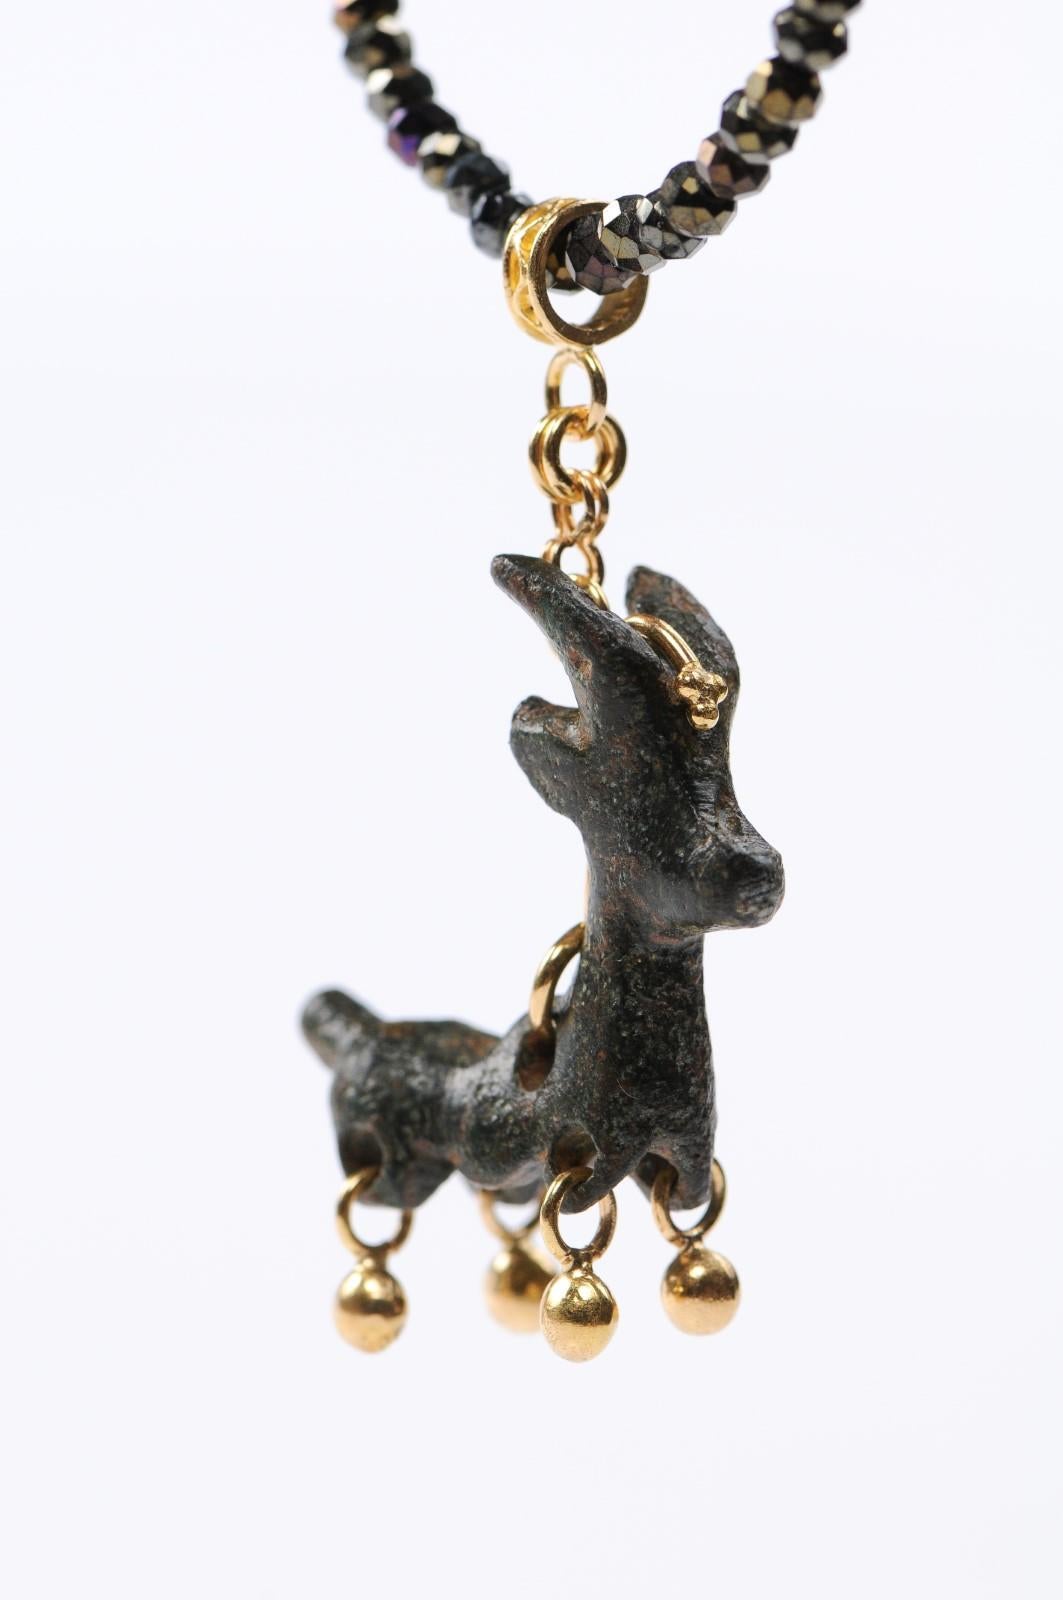 An authentic Roman bronze deer artifact (circa 1st-3rd century AD), with the contemporary addition of the 21-karat gold bezel. This ancient deer in bronze has been artisan crafted into this unique pendant with a custom 21-karat gold attachments at